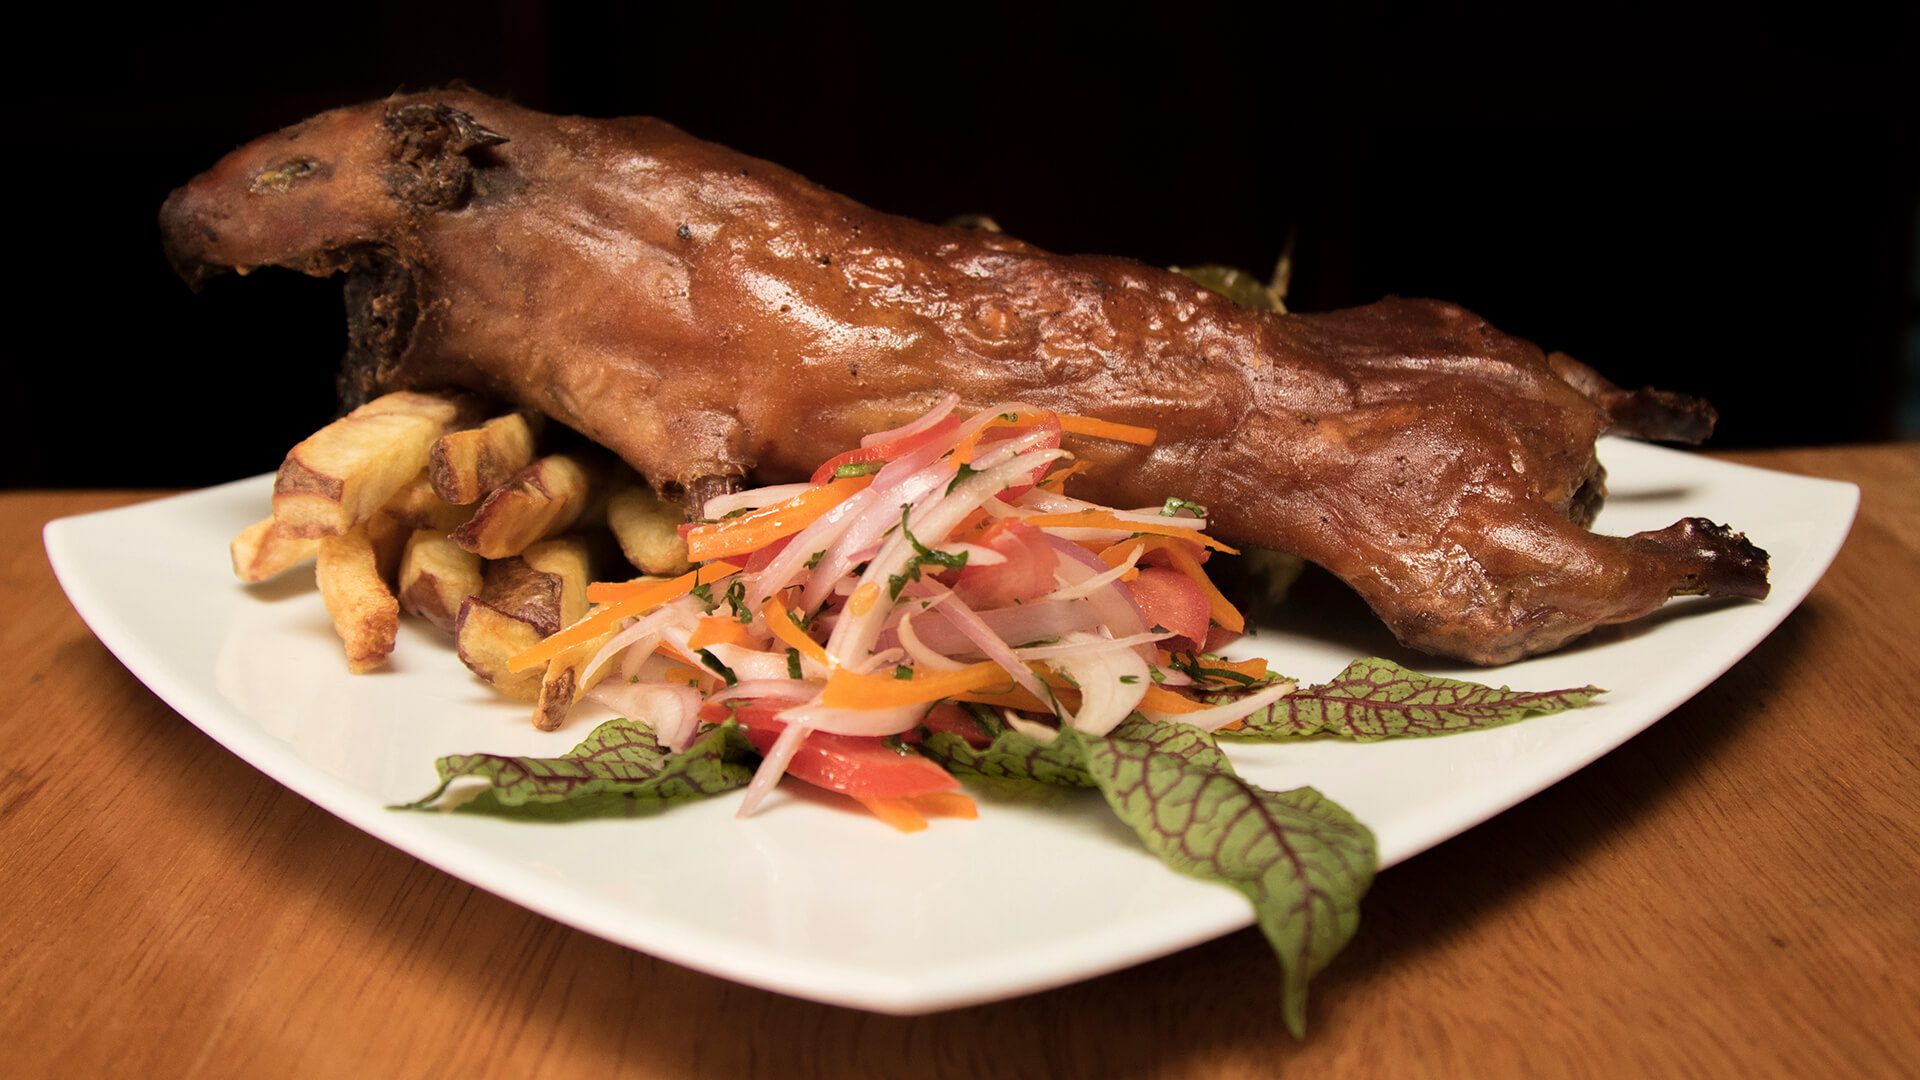 Guinea pig is a famous dish in Peru, here with fries and creole salad | RESPONSible Travel Peru